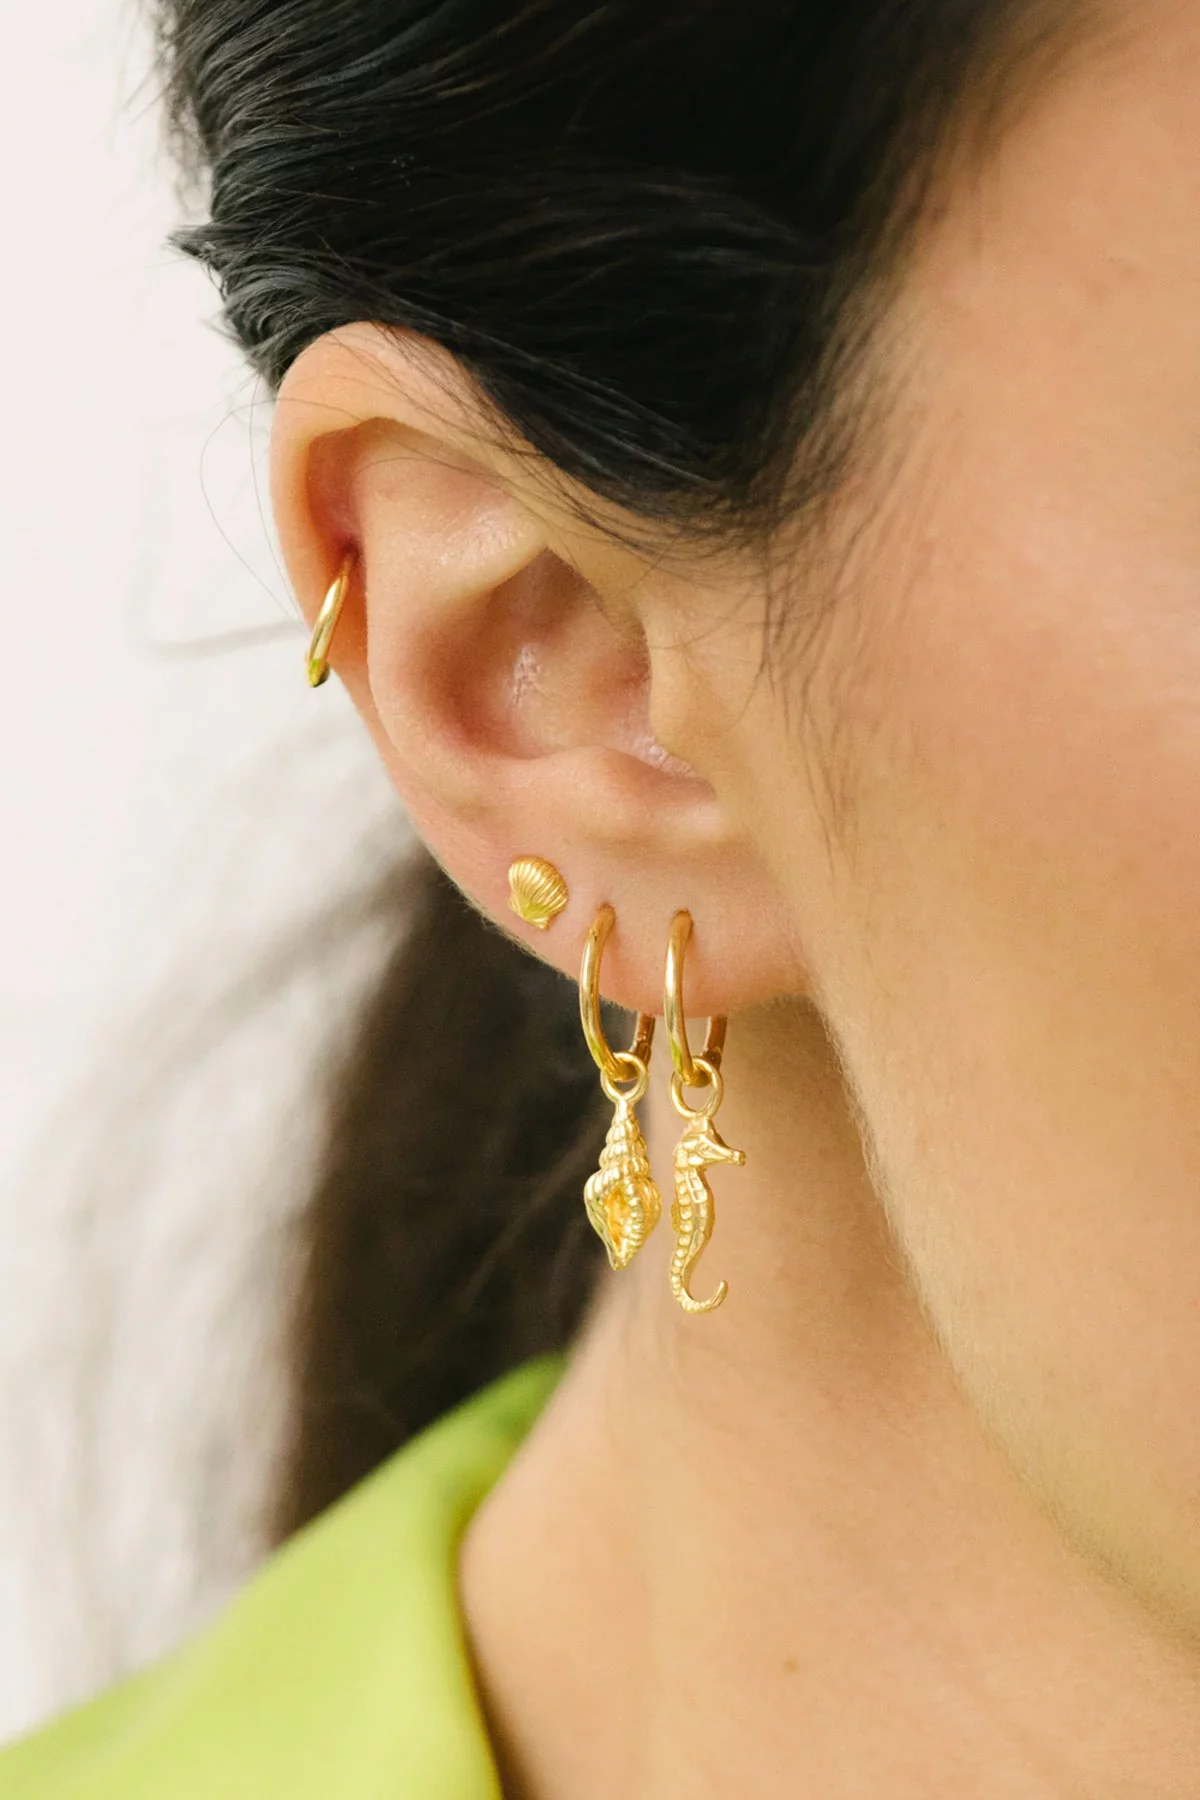 wildthings collectables - Seahorse earring gold plated 2